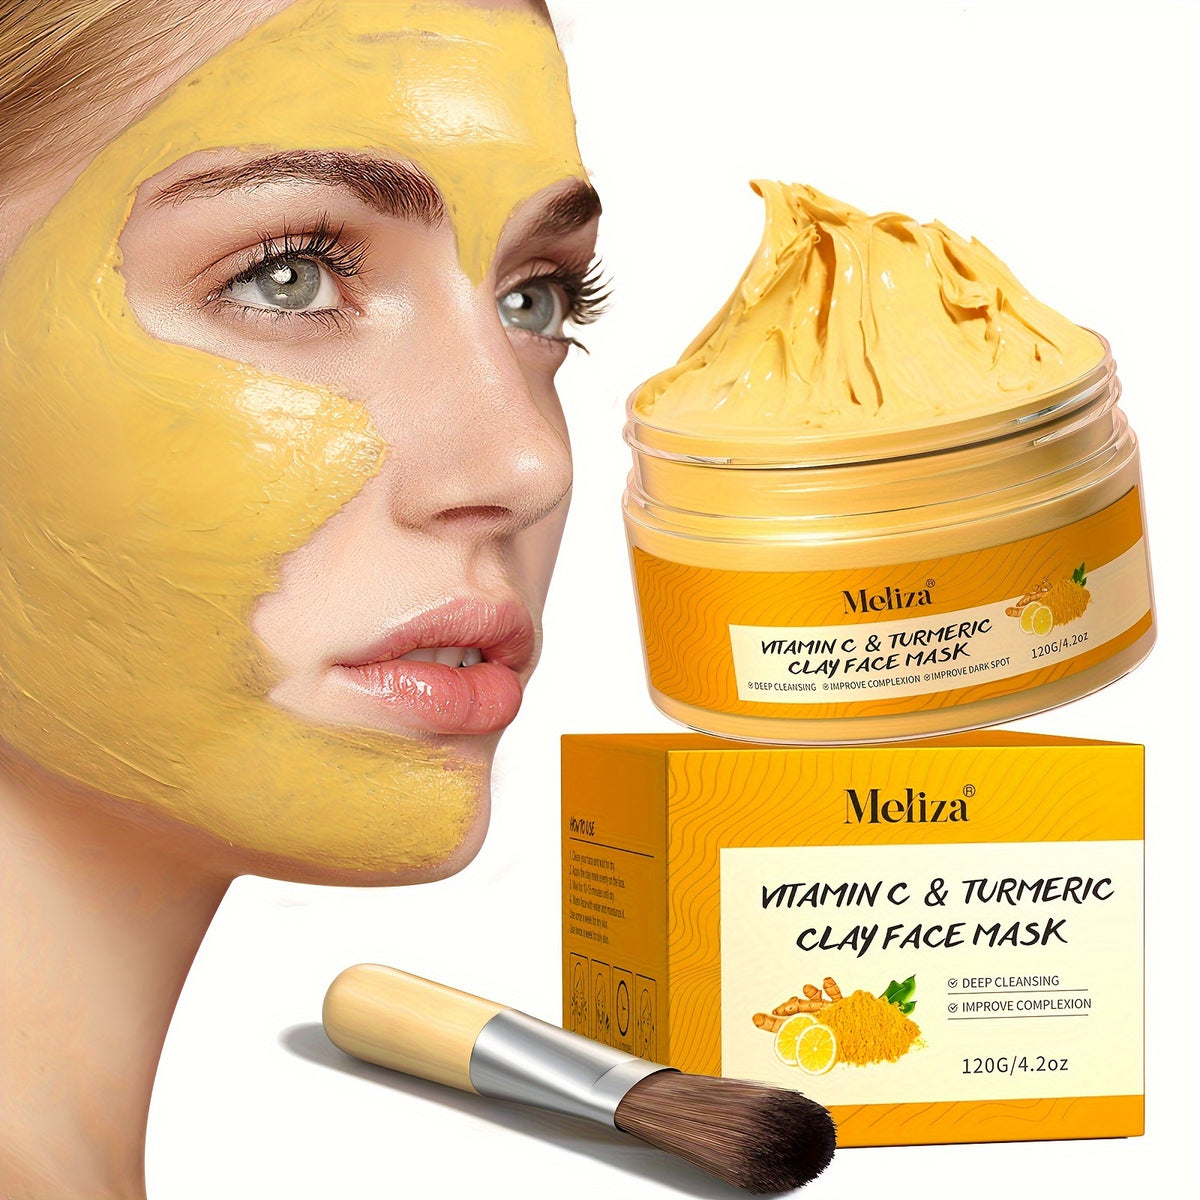 1pc, Turmeric Vitamin C Clay Mask, Deep Cleansing Face Mask, Skin Care Improve Blackheads Acne Dark Spots And Even Out Skin Tone Facial Mask, Control Oil And Refining Pores